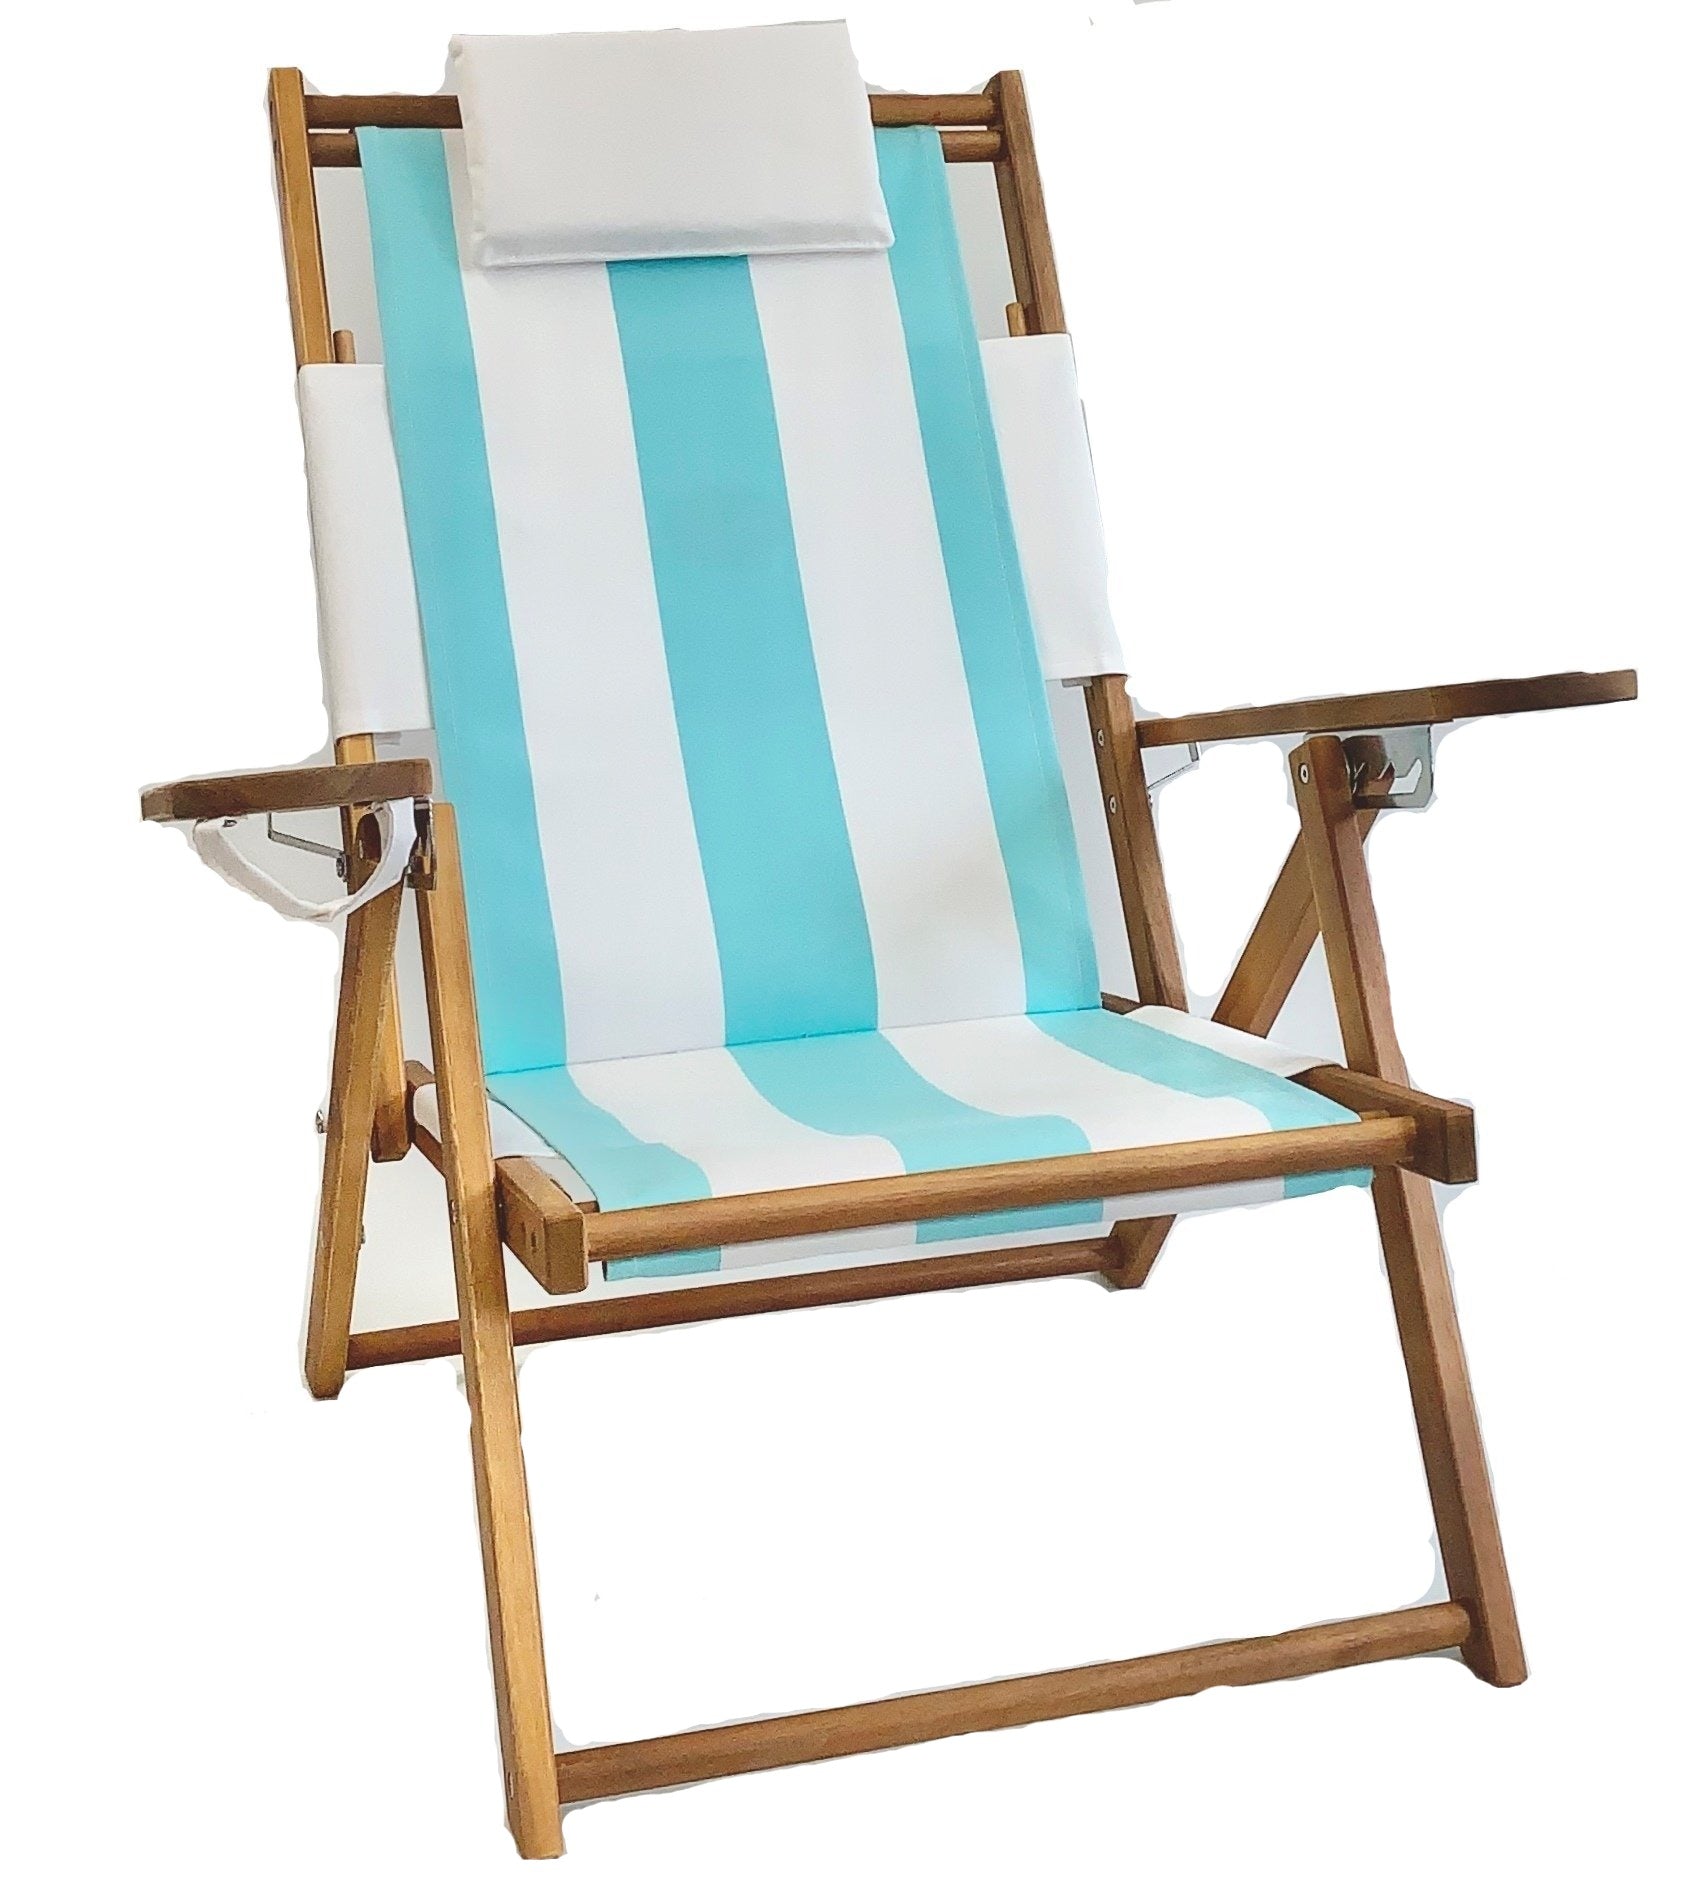 New Beach Chair Company Cape Cod for Large Space